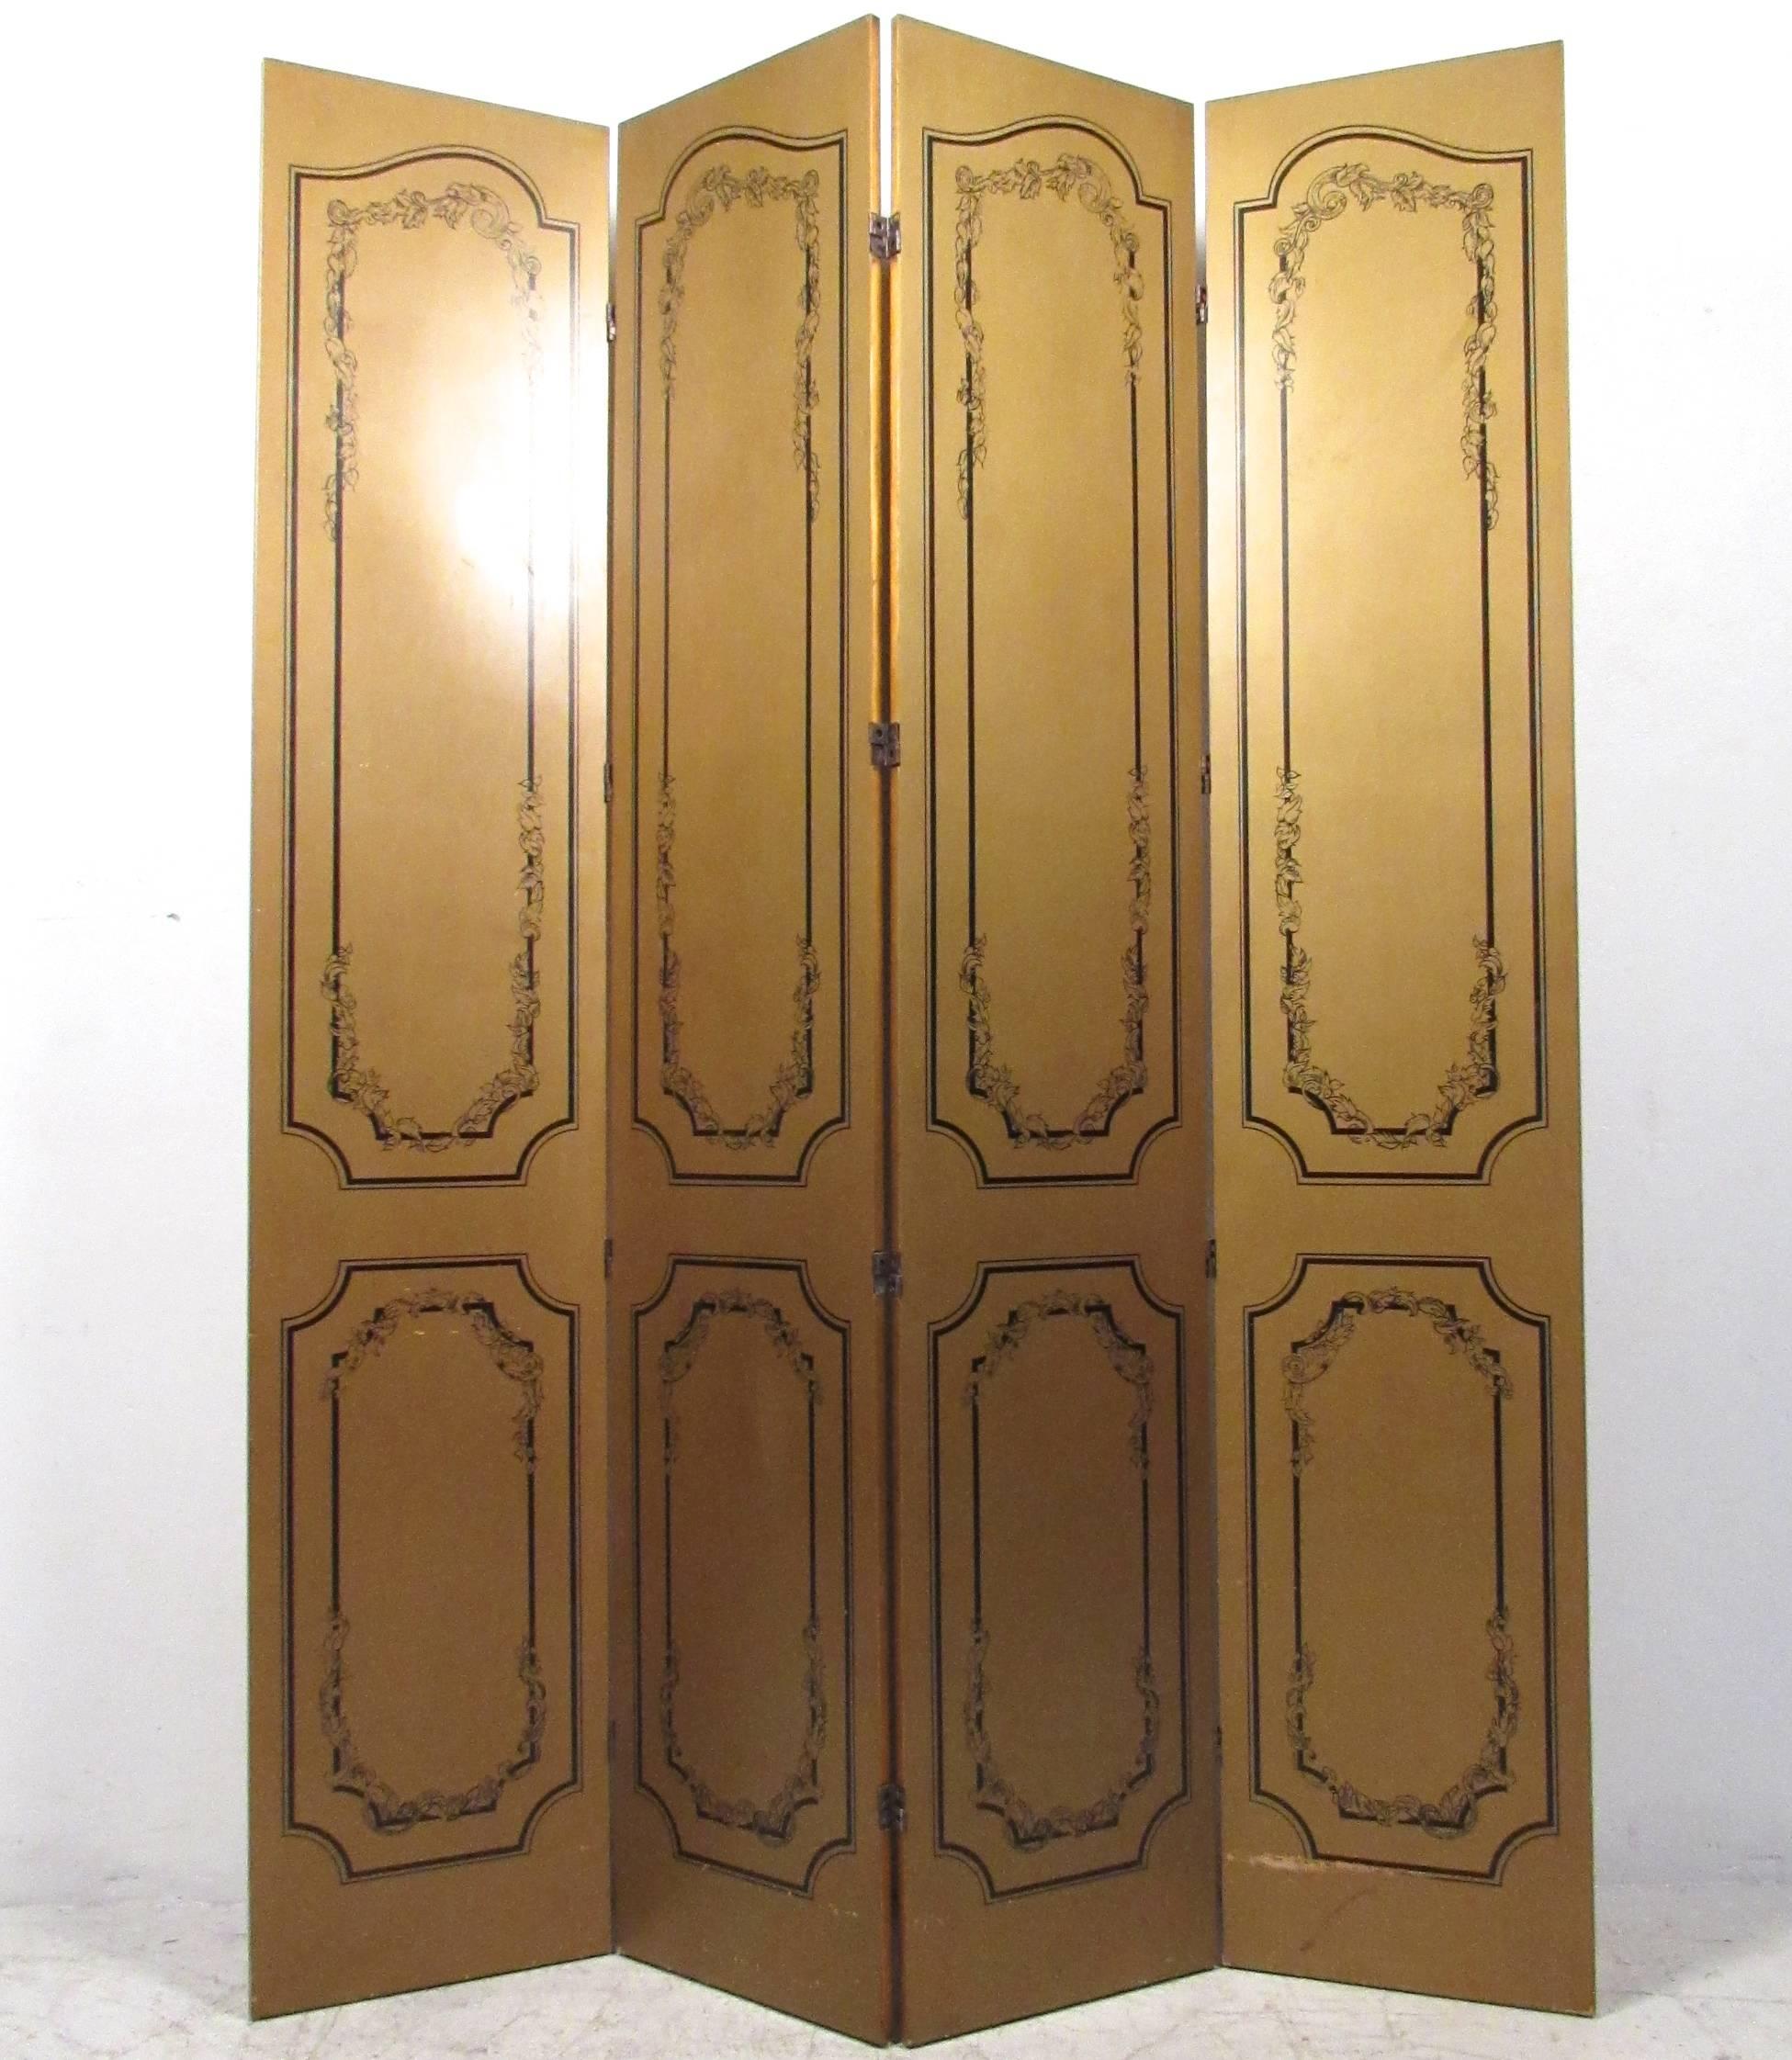 This seven foot gold leaf style room divider features a double-sided dual color scheme with ornate painted trim style details. Double fold hinges and it's unique finish make this a fantastic addition to any room. Please confirm item location (NY or